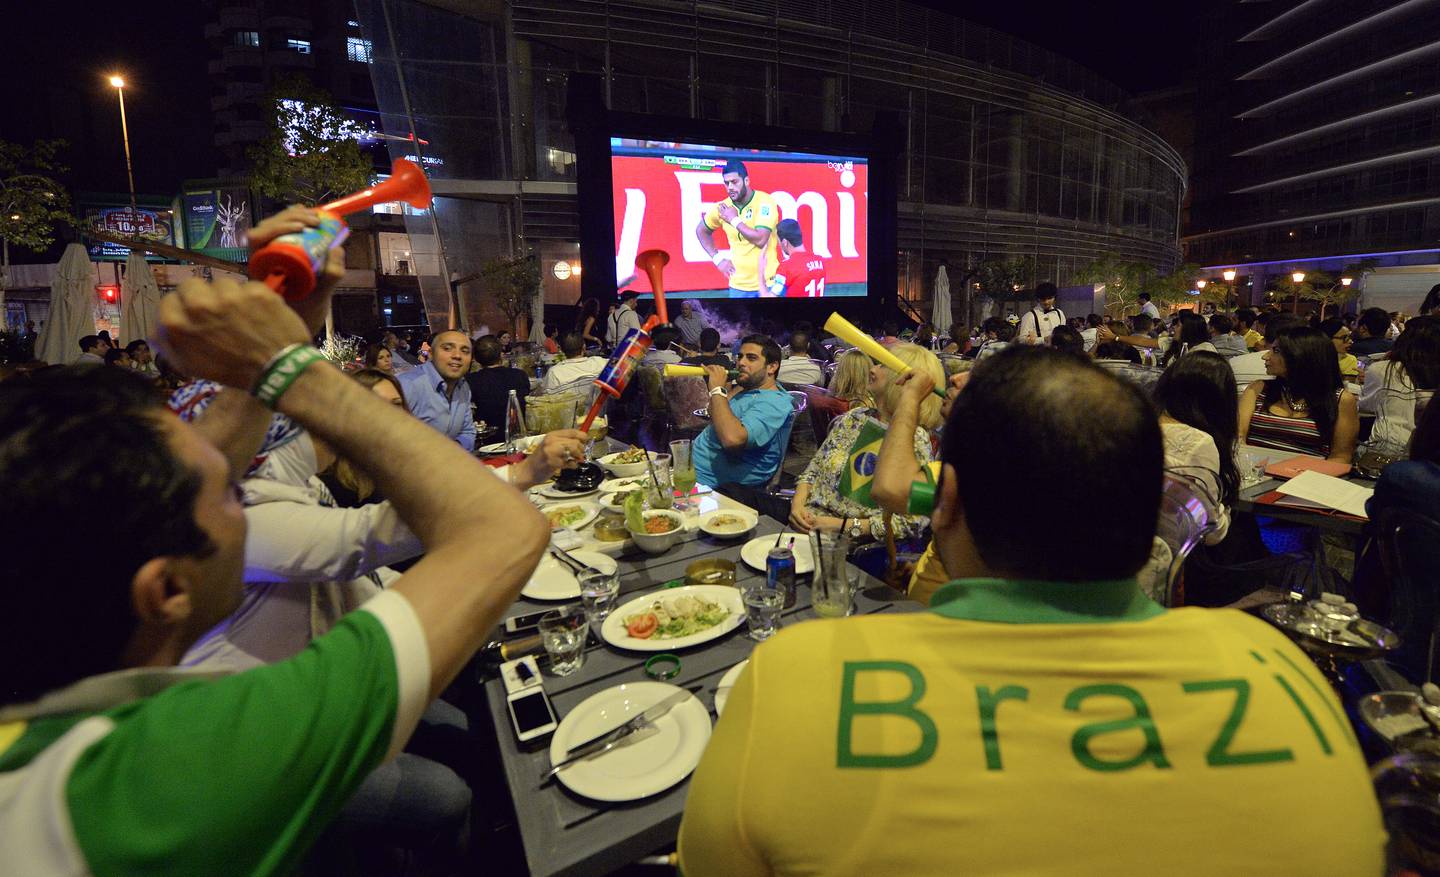 Lebanese soccer fans watch on a big screen the opening match between Brazil and Croatia at the 2014 FIFA World Cup at a cafe in Beirut, 2014. EPA